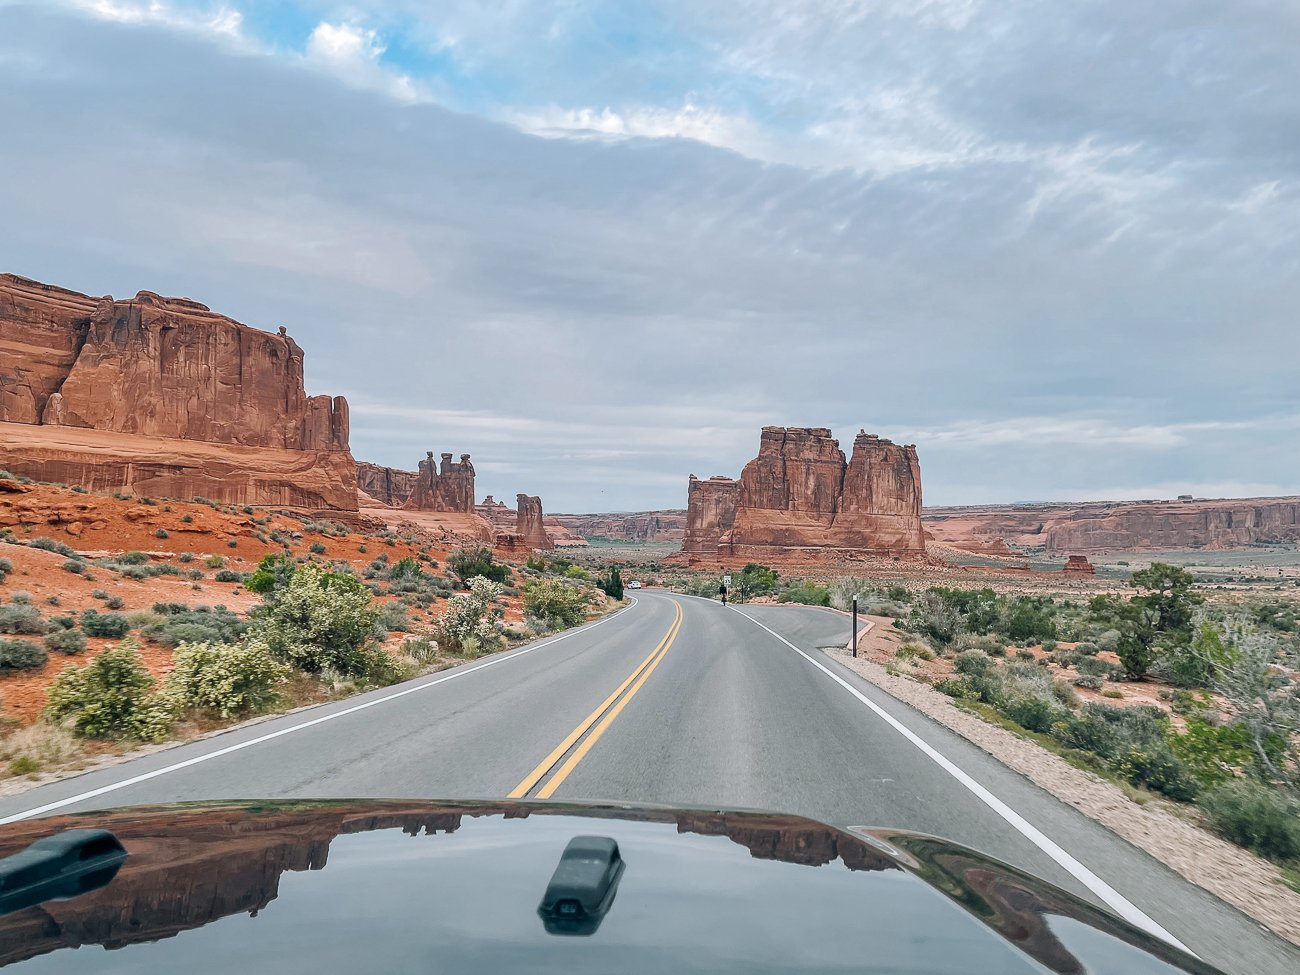 Driving into Arches National Park